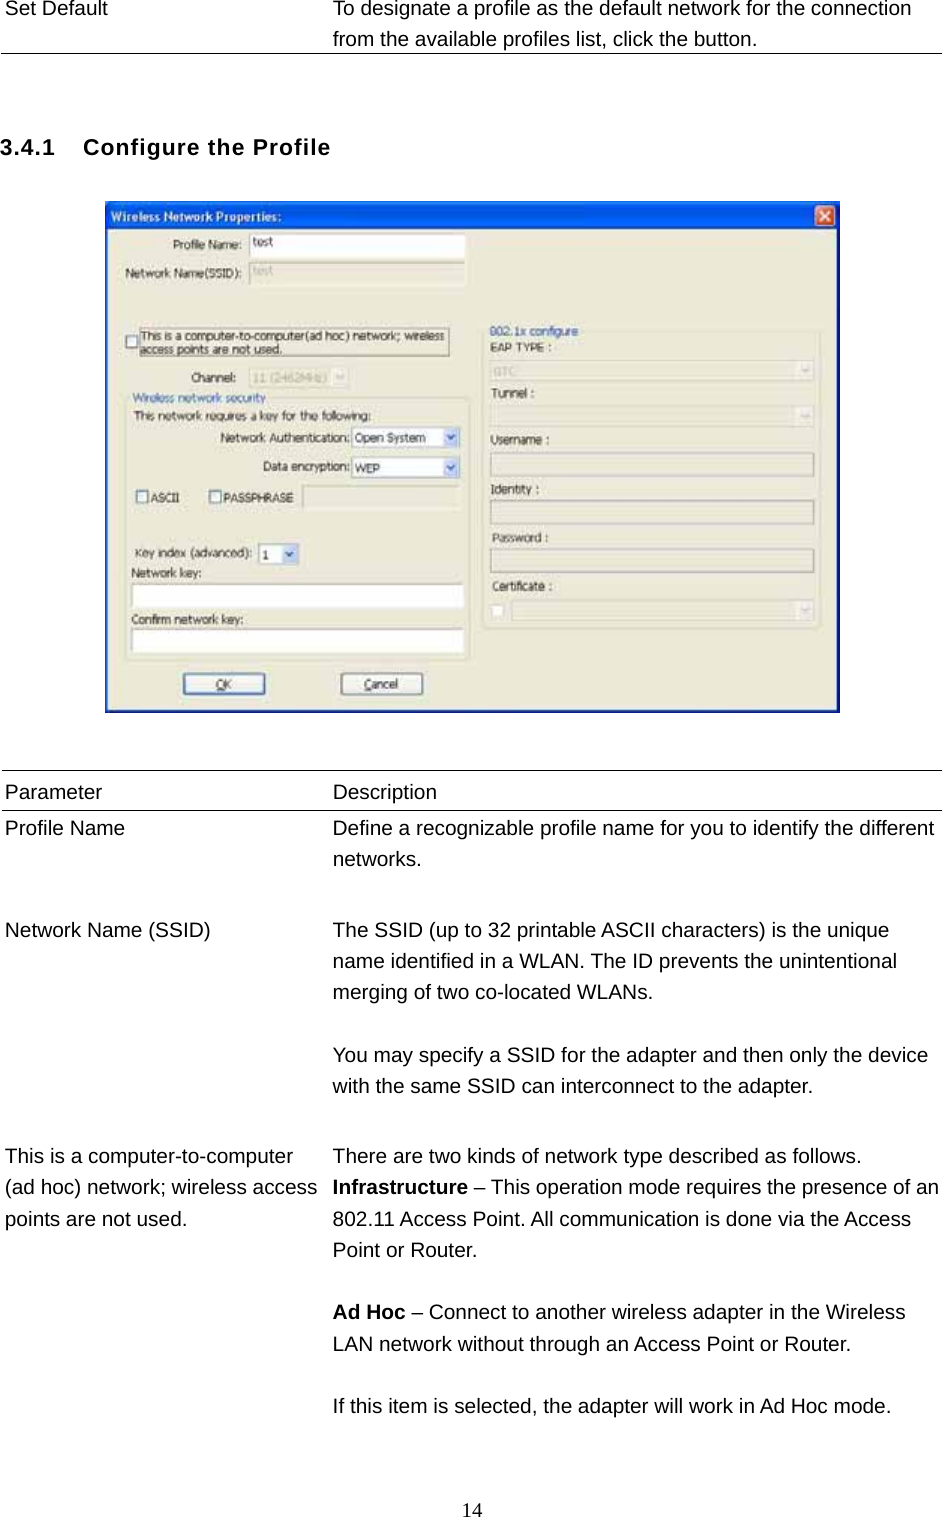  14 Set Default  To designate a profile as the default network for the connection from the available profiles list, click the button.   3.4.1    Configure the Profile     Parameter Description Profile Name  Define a recognizable profile name for you to identify the different networks.   Network Name (SSID)  The SSID (up to 32 printable ASCII characters) is the unique name identified in a WLAN. The ID prevents the unintentional merging of two co-located WLANs.    You may specify a SSID for the adapter and then only the device with the same SSID can interconnect to the adapter.   This is a computer-to-computer (ad hoc) network; wireless access points are not used. There are two kinds of network type described as follows. Infrastructure – This operation mode requires the presence of an 802.11 Access Point. All communication is done via the Access Point or Router.    Ad Hoc – Connect to another wireless adapter in the Wireless LAN network without through an Access Point or Router.  If this item is selected, the adapter will work in Ad Hoc mode.   